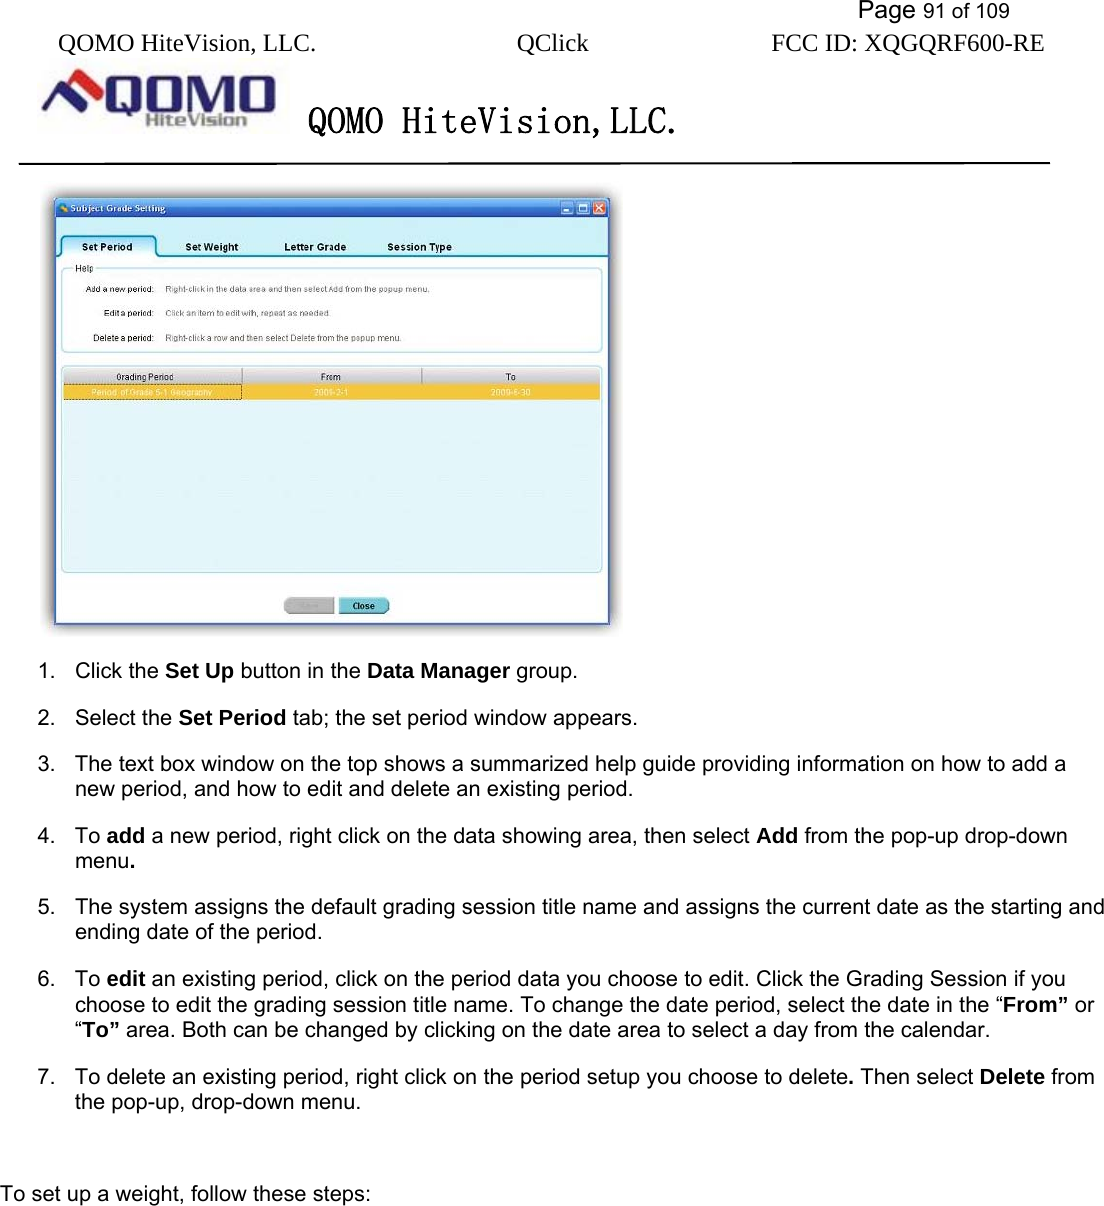           Page 91 of 109 QOMO HiteVision, LLC.  QClick        FCC ID: XQGQRF600-RE     QOMO HiteVision,LLC.    1. Click the Set Up button in the Data Manager group. 2. Select the Set Period tab; the set period window appears. 3.  The text box window on the top shows a summarized help guide providing information on how to add a new period, and how to edit and delete an existing period.   4. To add a new period, right click on the data showing area, then select Add from the pop-up drop-down menu. 5.  The system assigns the default grading session title name and assigns the current date as the starting and ending date of the period. 6. To edit an existing period, click on the period data you choose to edit. Click the Grading Session if you choose to edit the grading session title name. To change the date period, select the date in the “From” or “To” area. Both can be changed by clicking on the date area to select a day from the calendar. 7.  To delete an existing period, right click on the period setup you choose to delete. Then select Delete from the pop-up, drop-down menu.  To set up a weight, follow these steps: 